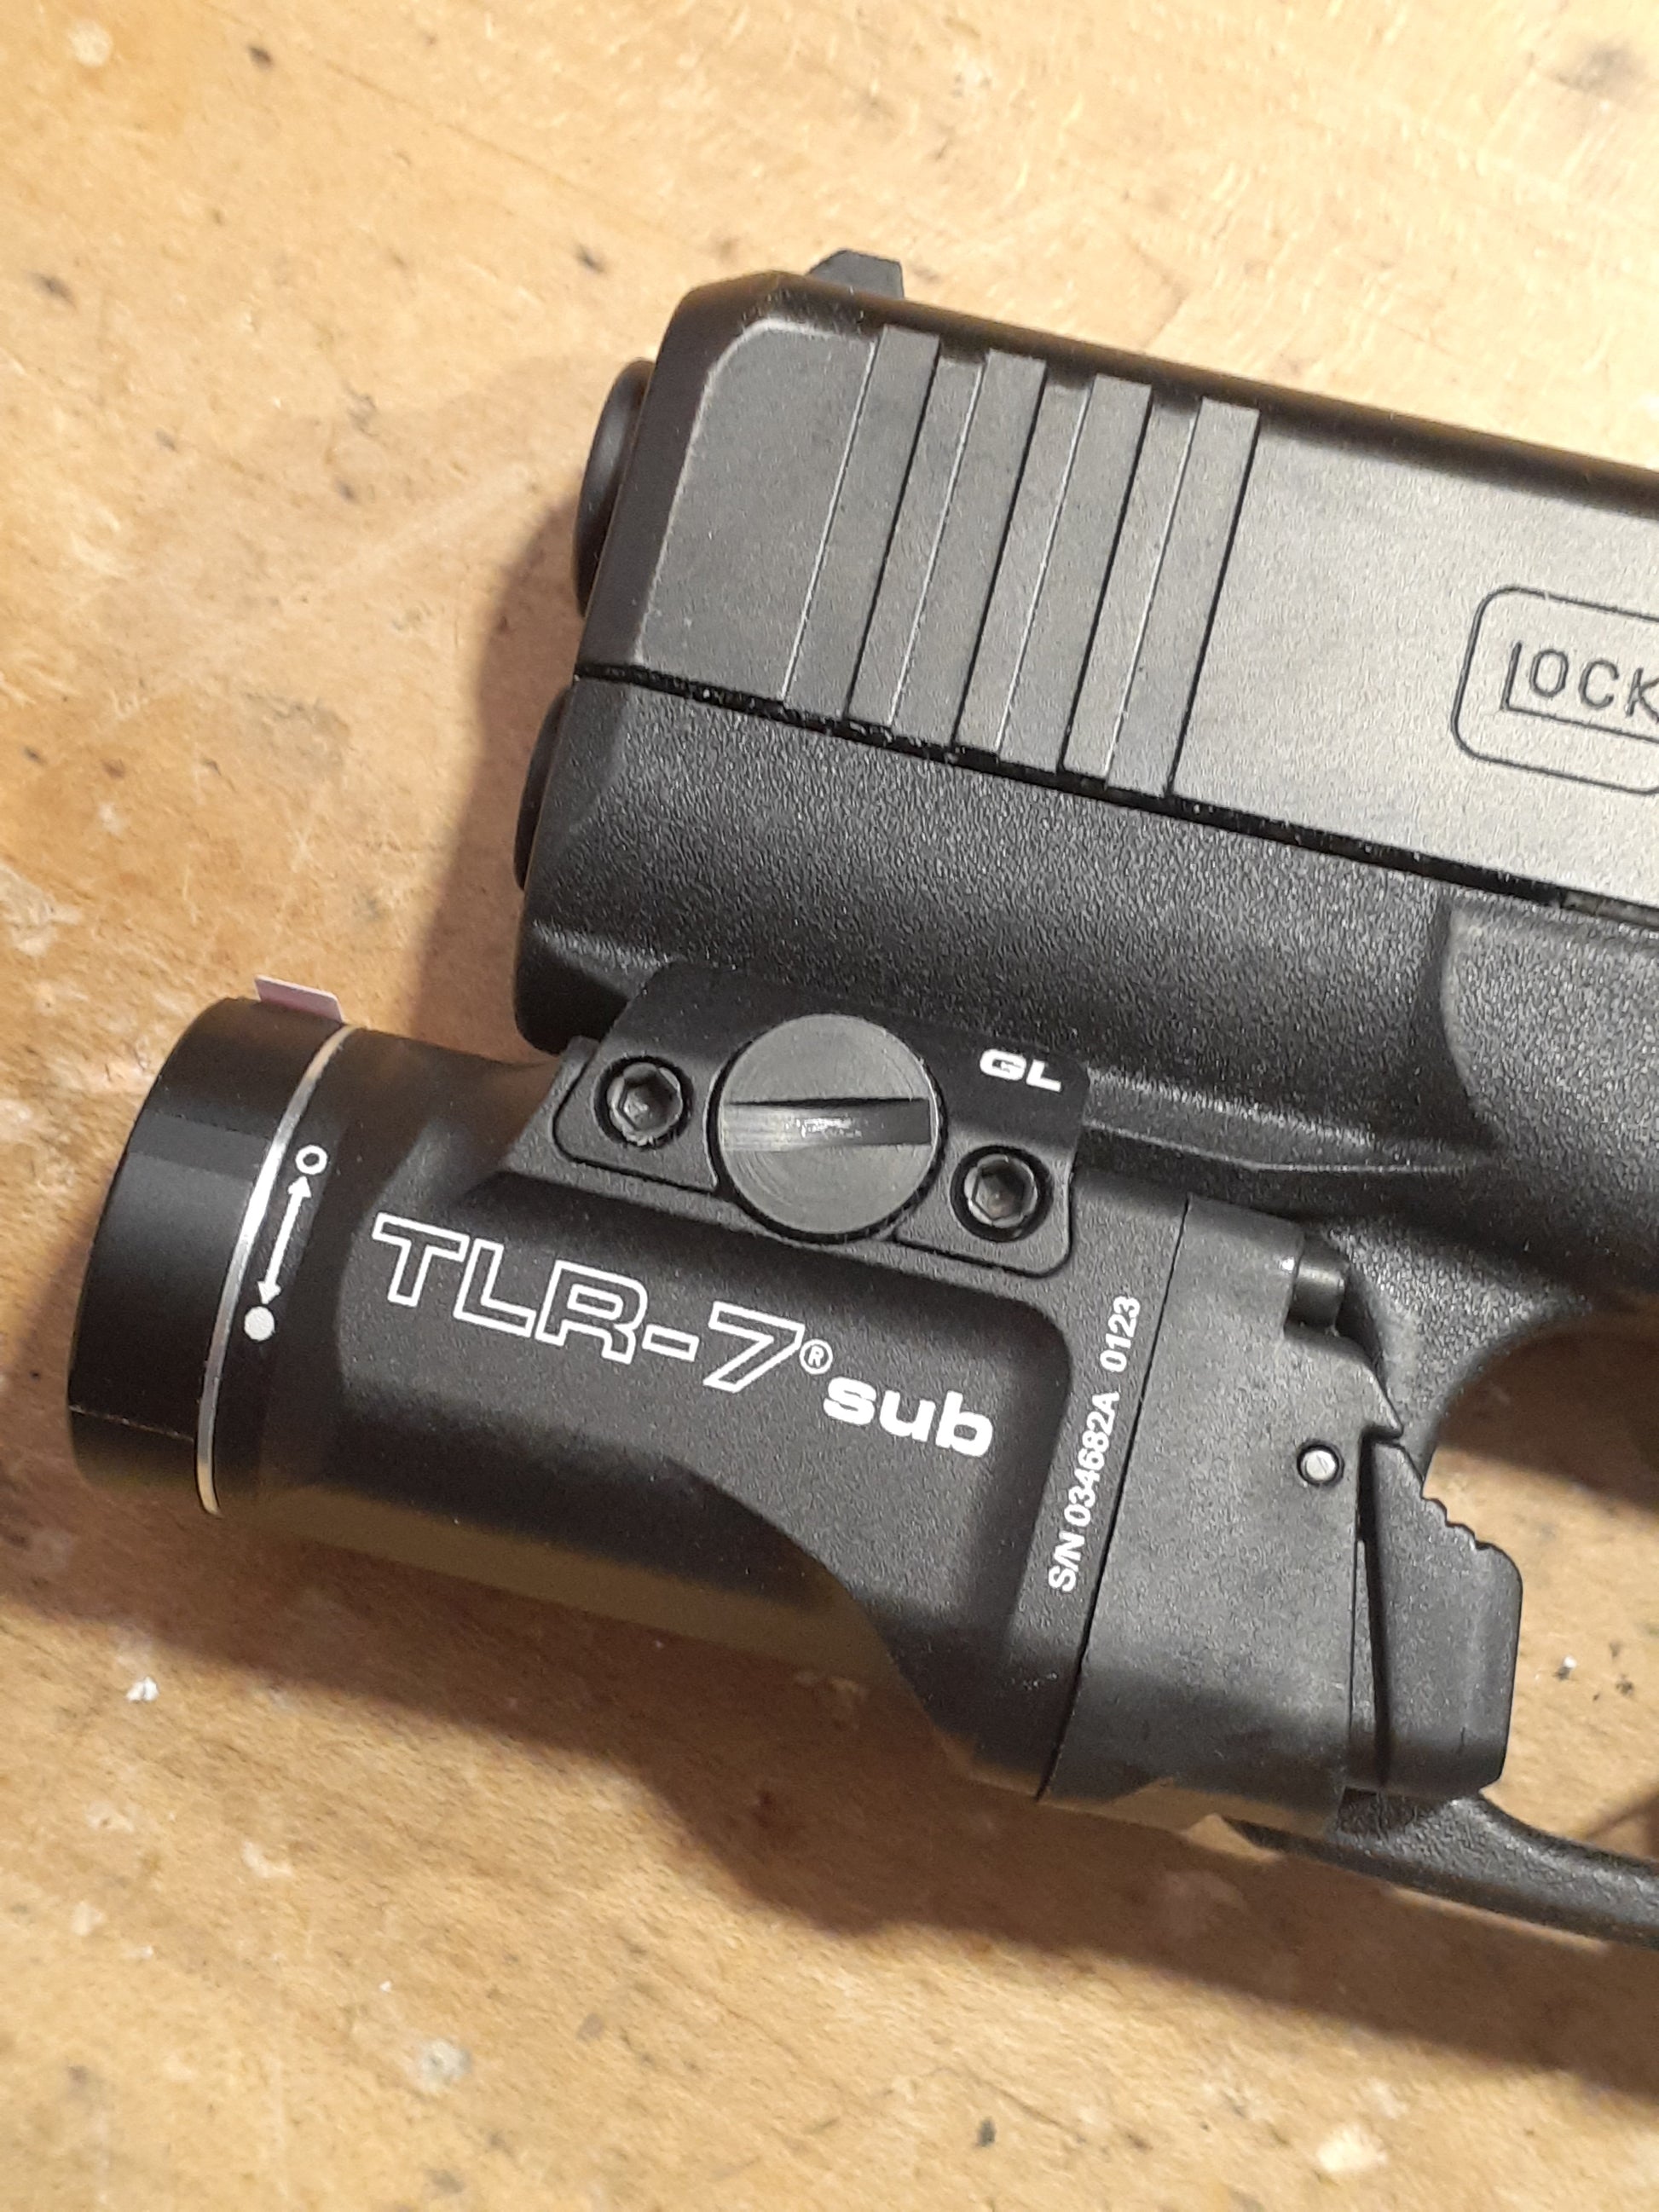 Glock with tlr7 sub